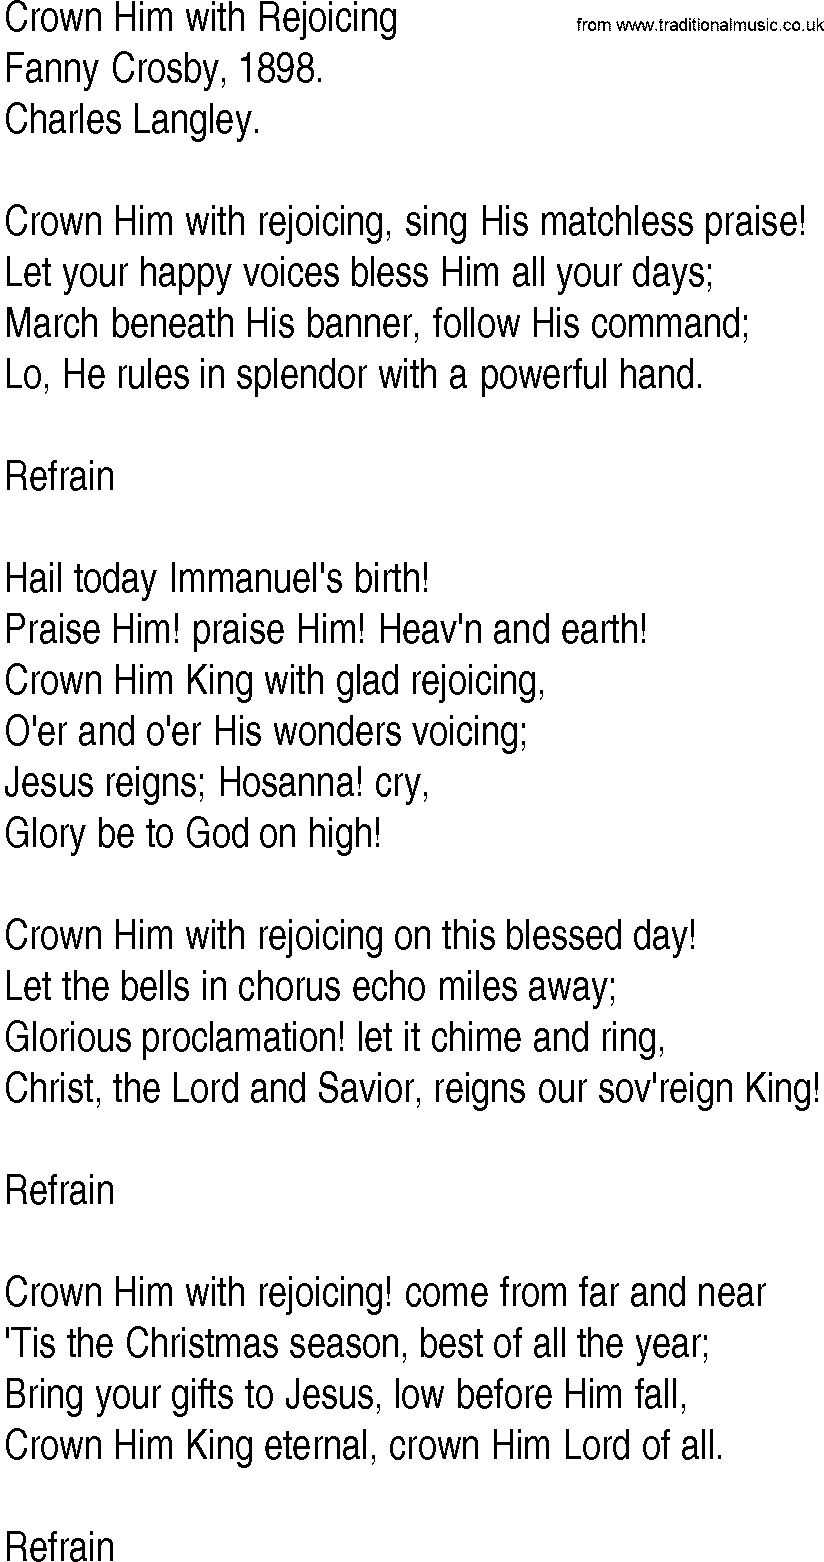 Hymn and Gospel Song: Crown Him with Rejoicing by Fanny Crosby lyrics